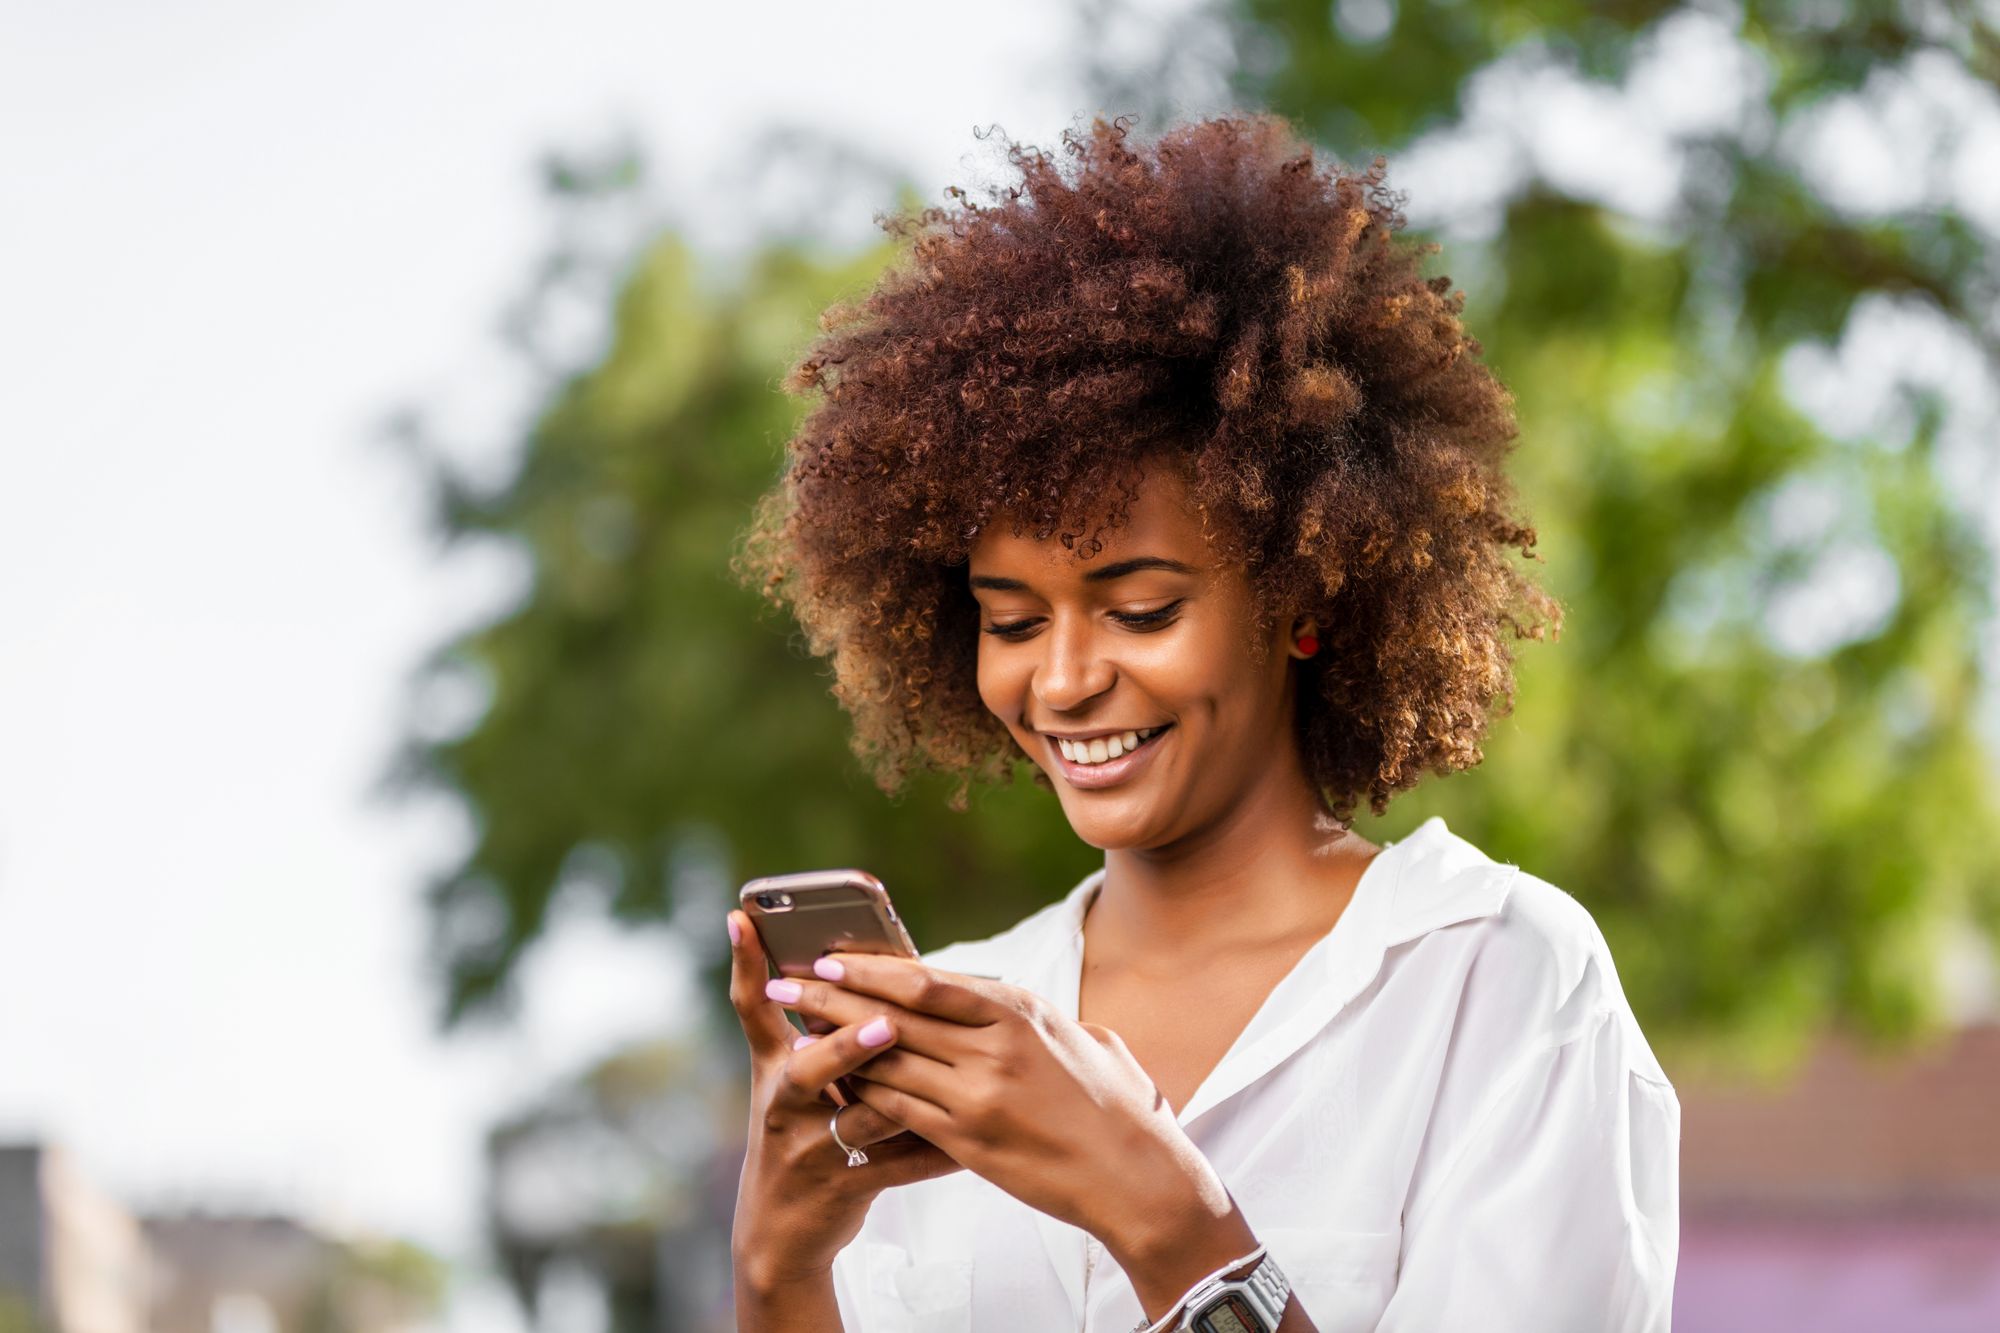 woman with curly dirty blonde hair smiling look at phone